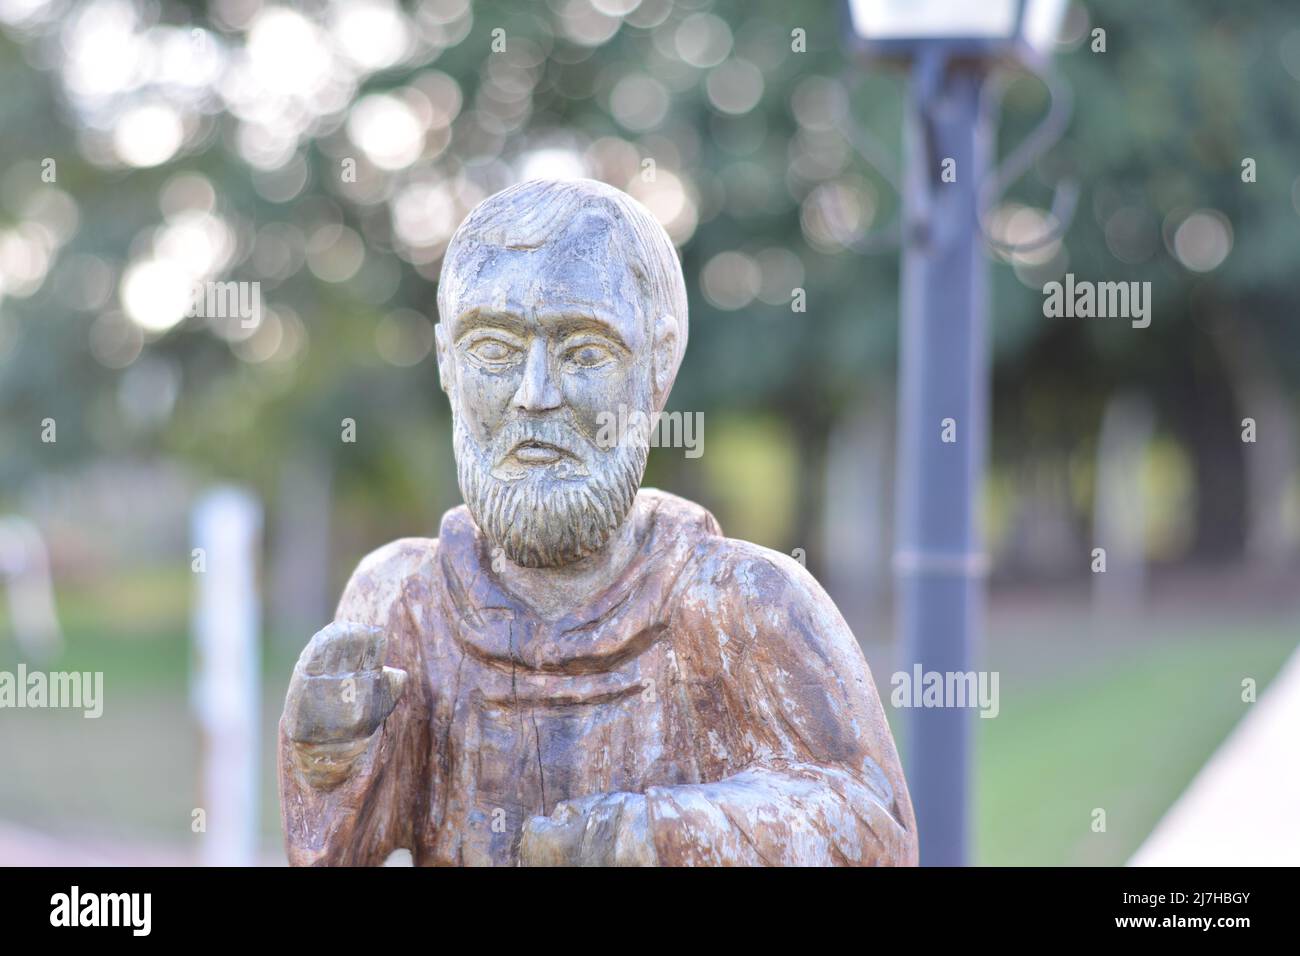 Minister, wooden figurine of Minister, Catholic Church, Brazil, South America, Latin America, zoom, selective focus, outdoors Stock Photo